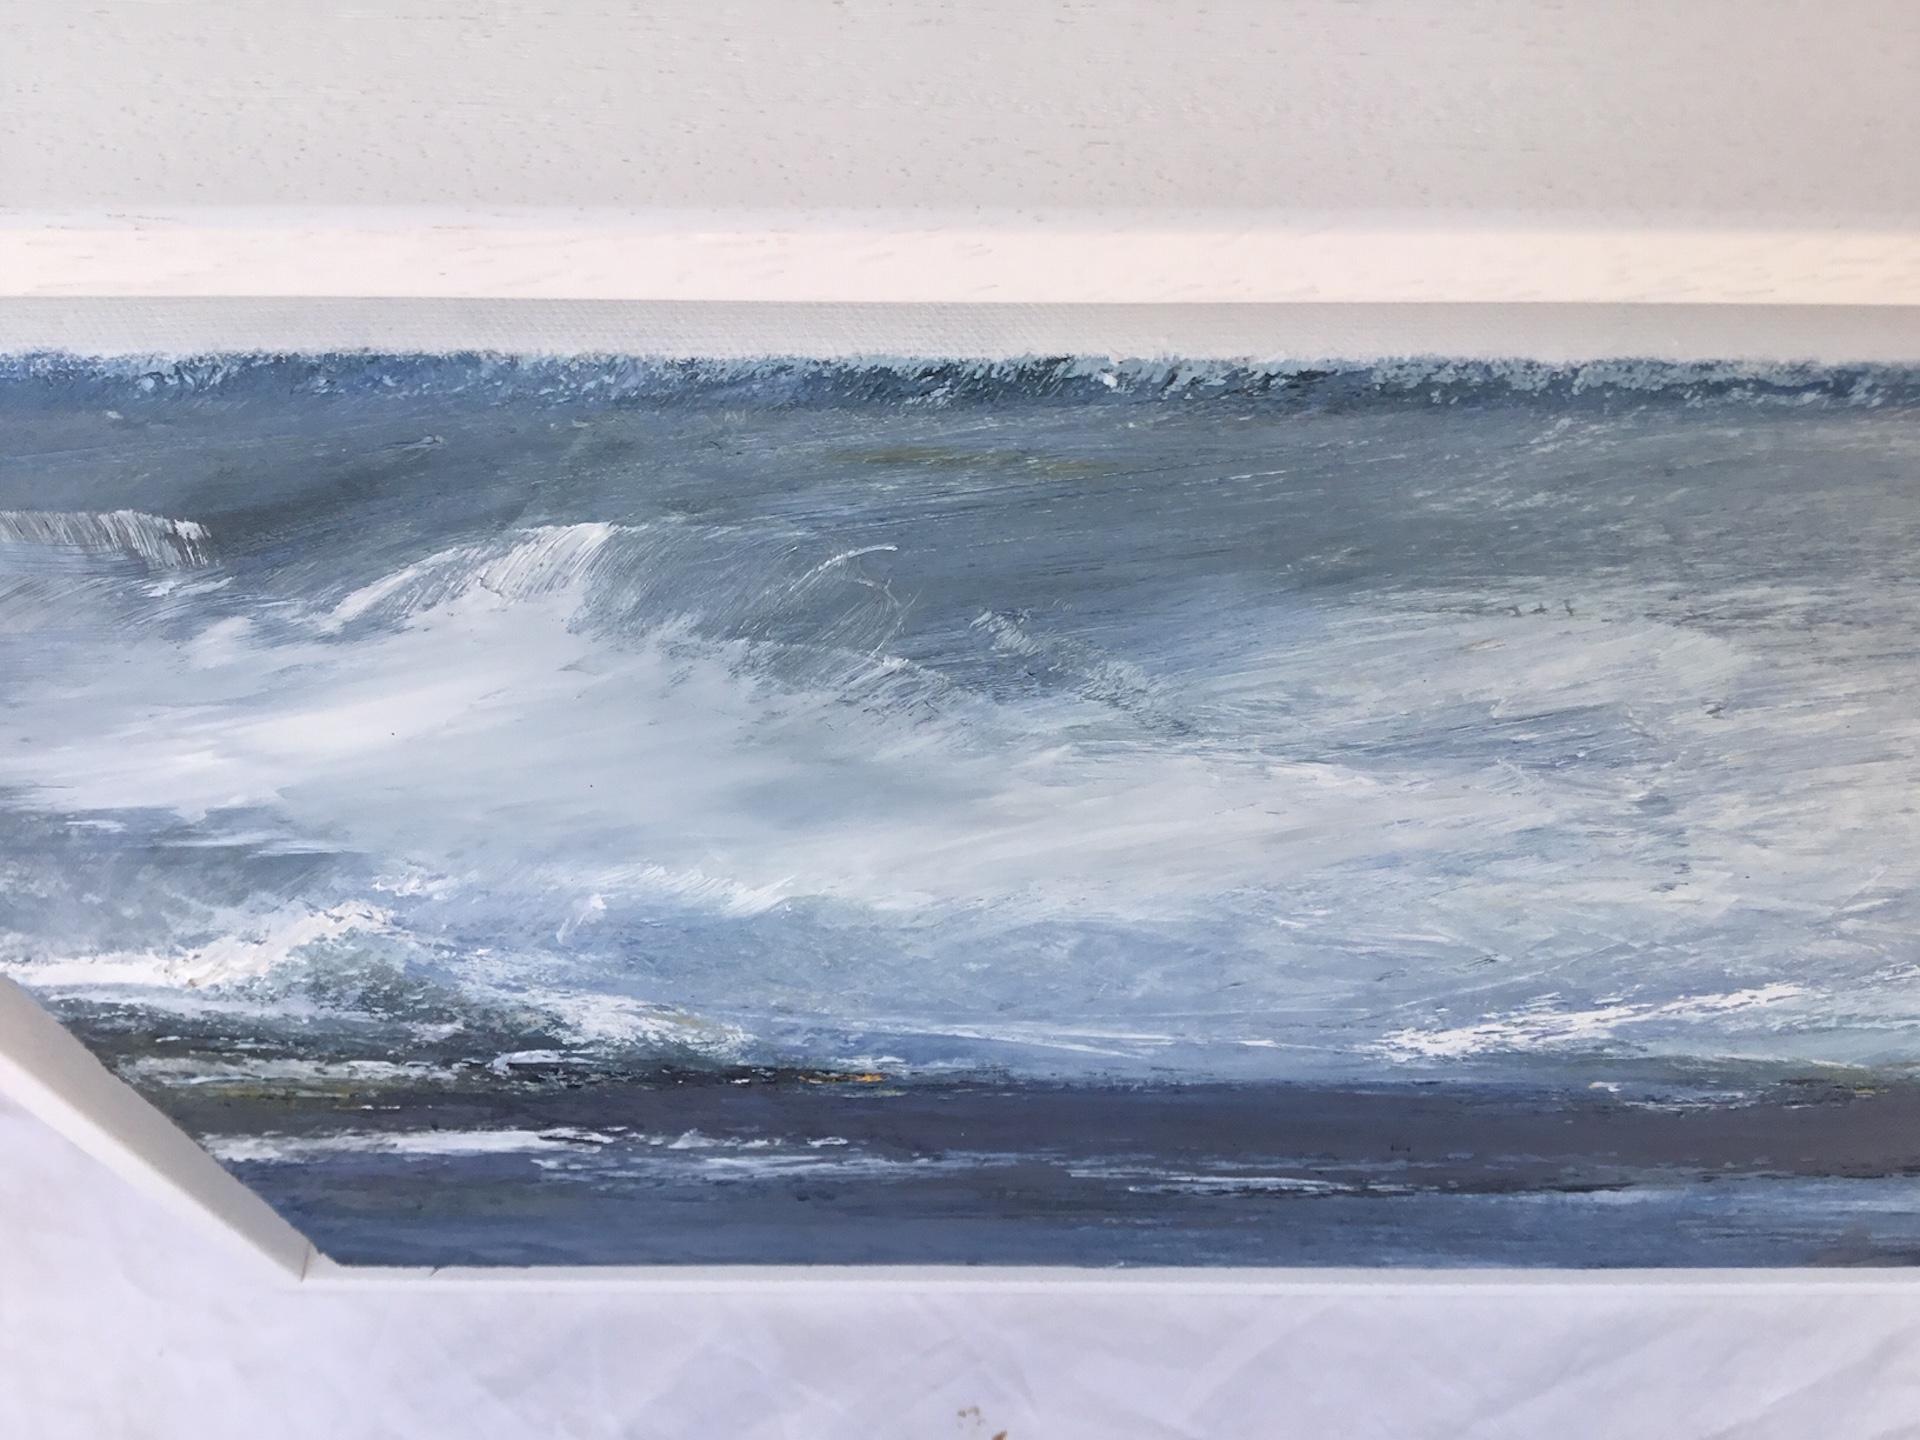 Maria Floyd
Under a Low Sky
Original Abstract Seascape Painting
Mixed Media on Board
Framed Size: H 45cm x W 55cm x D 5cm
Sold Framed in a White Wooden Frame
Please note that insitu images are purely an indication of how a piece may look.

Under a